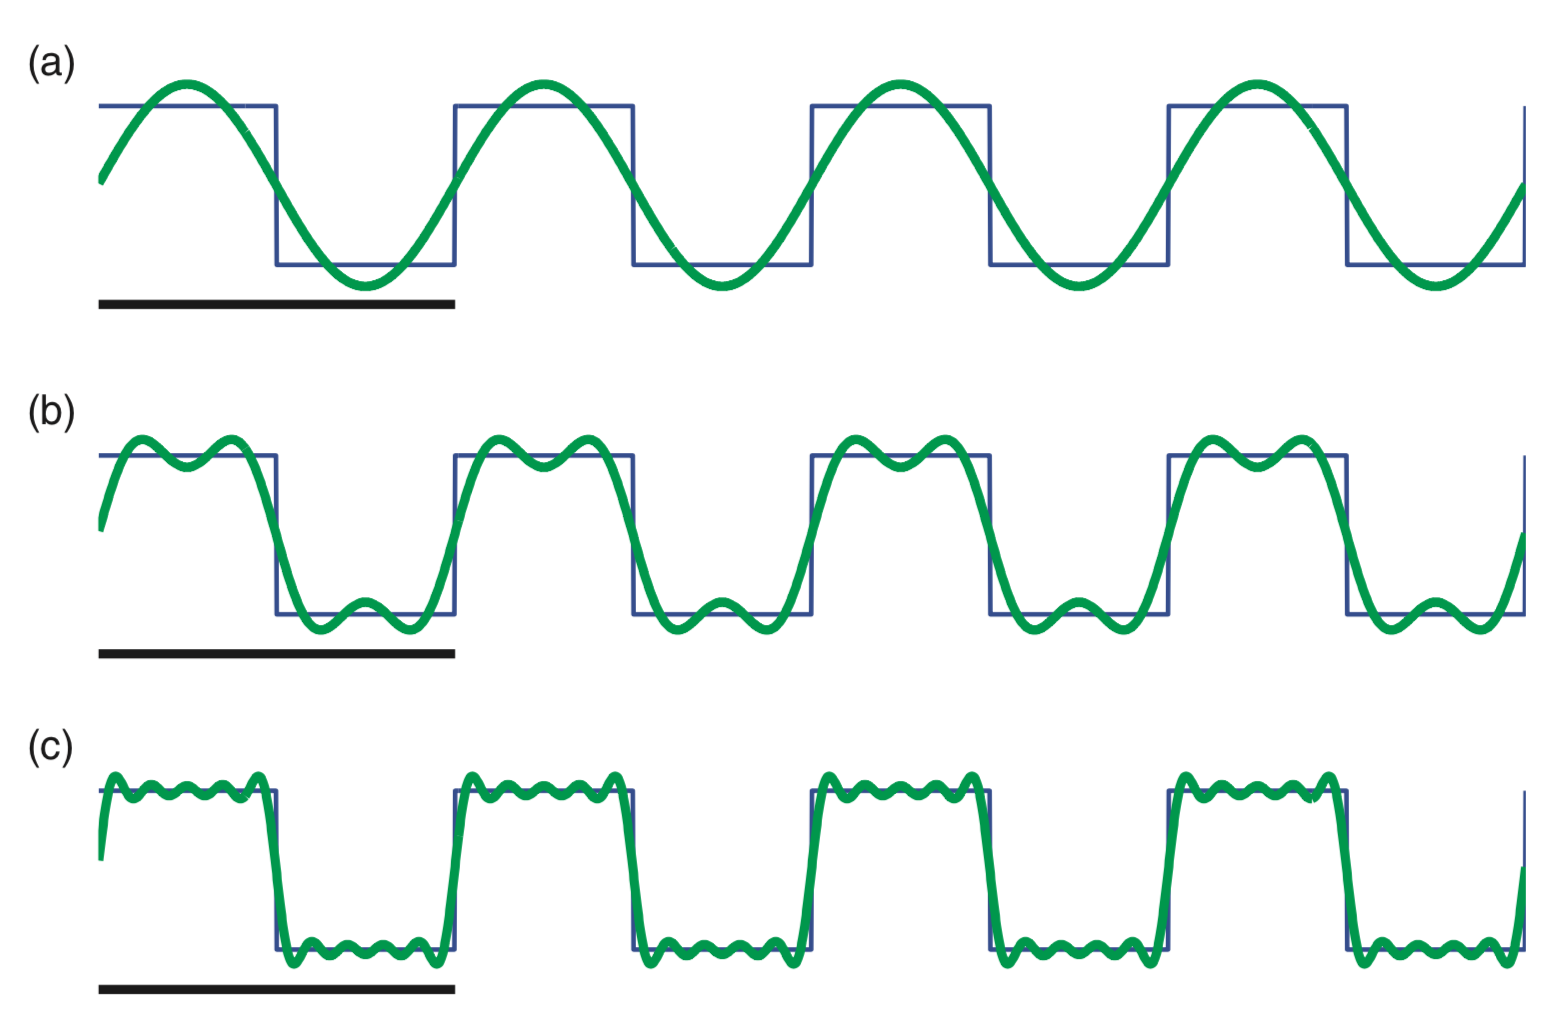 Approximation of a square wave with sinusoids.